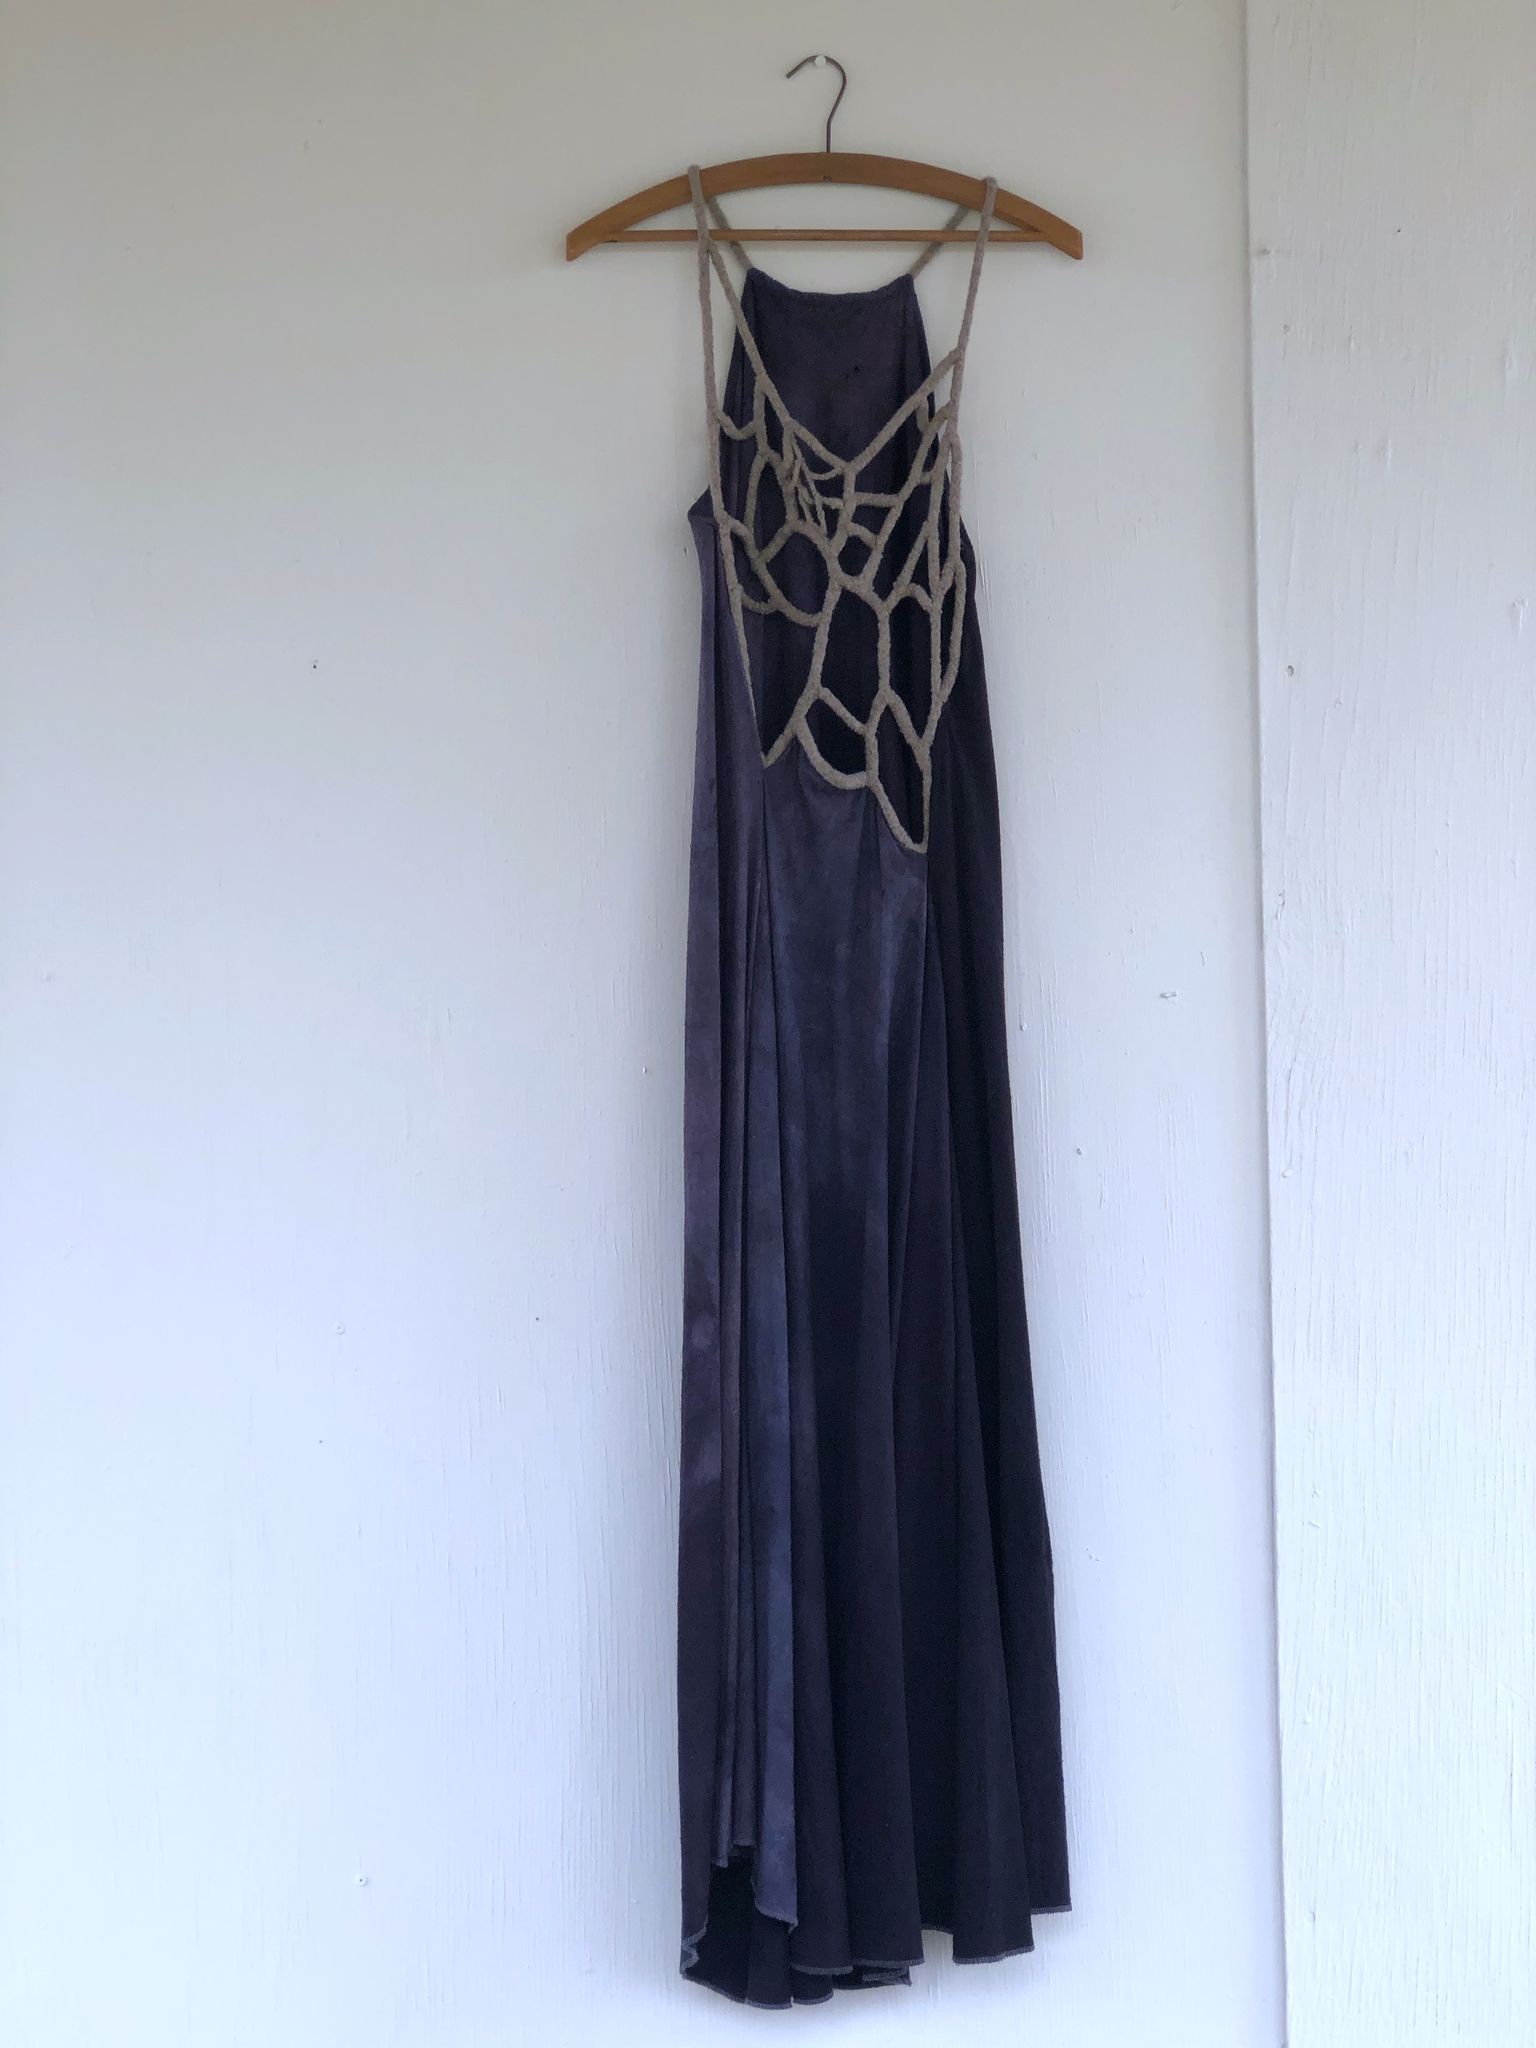 blue and grey dress hanging on a hanger on a white wall